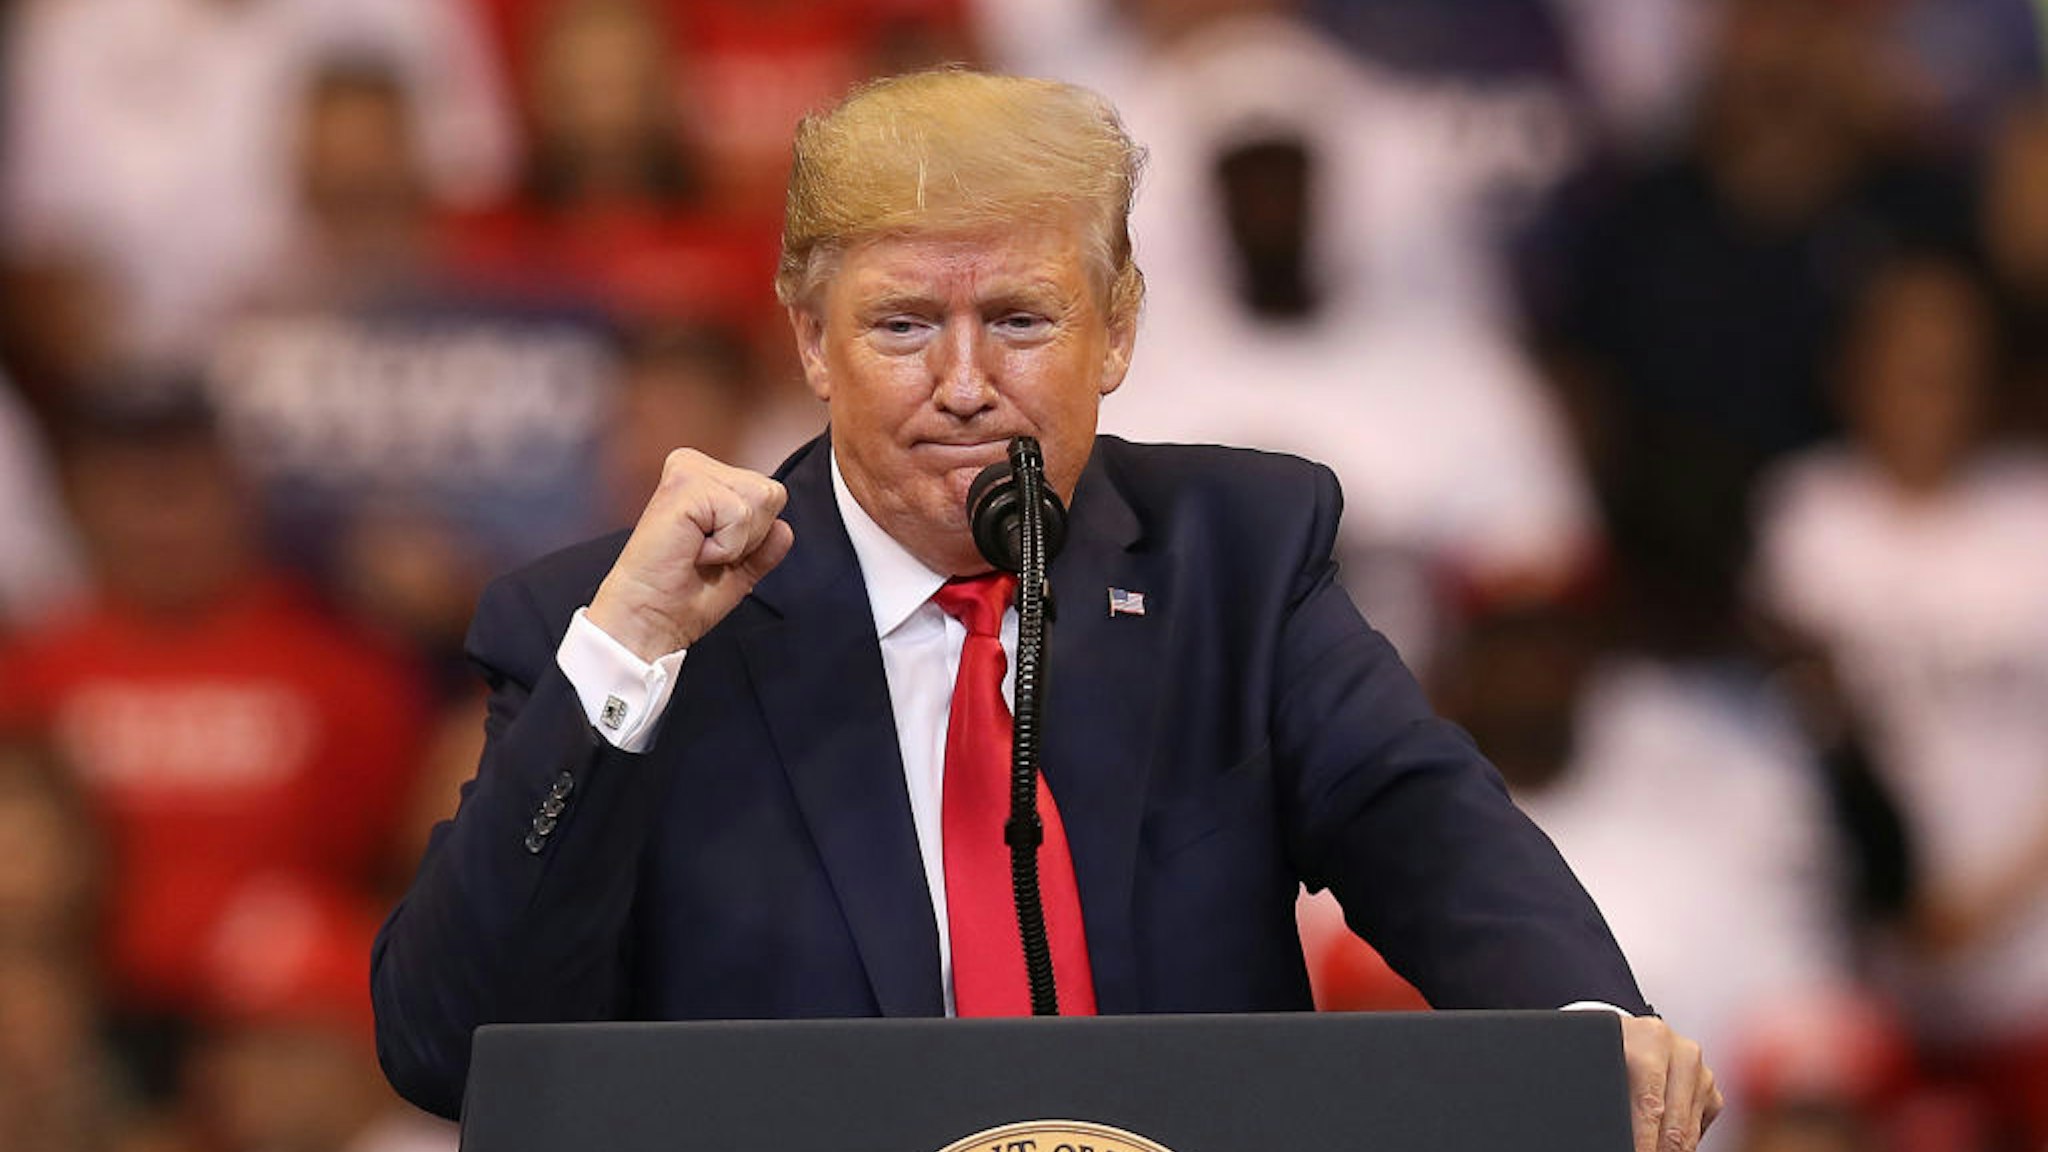 U.S. President Donald Trump speaks during a homecoming campaign rally at the BB&amp;T Center on November 26, 2019 in Sunrise, Florida. President Trump continues to campaign for re-election in the 2020 presidential race. (Photo by Joe Raedle/Getty Images)